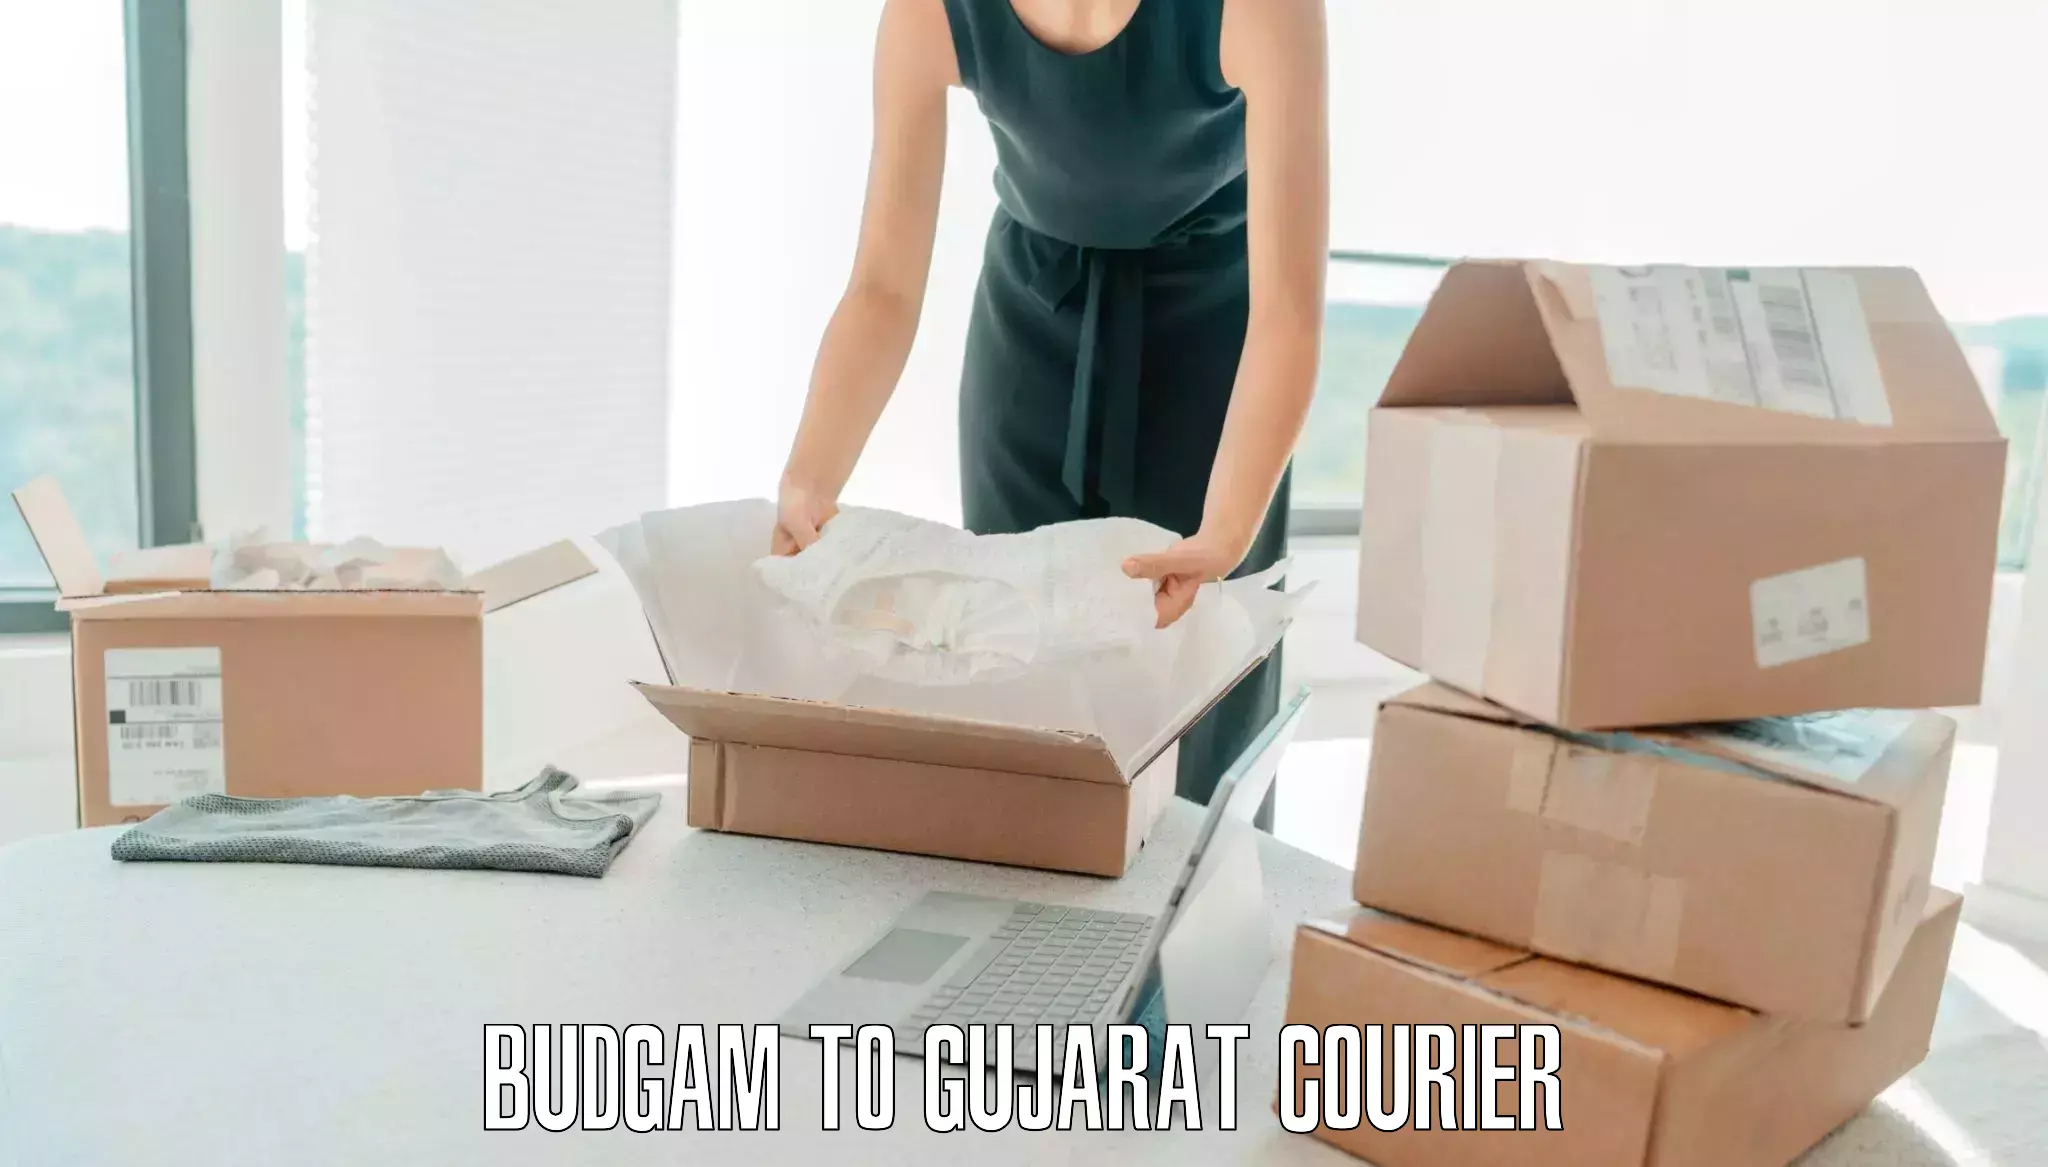 Instant baggage transport quote Budgam to Gujarat